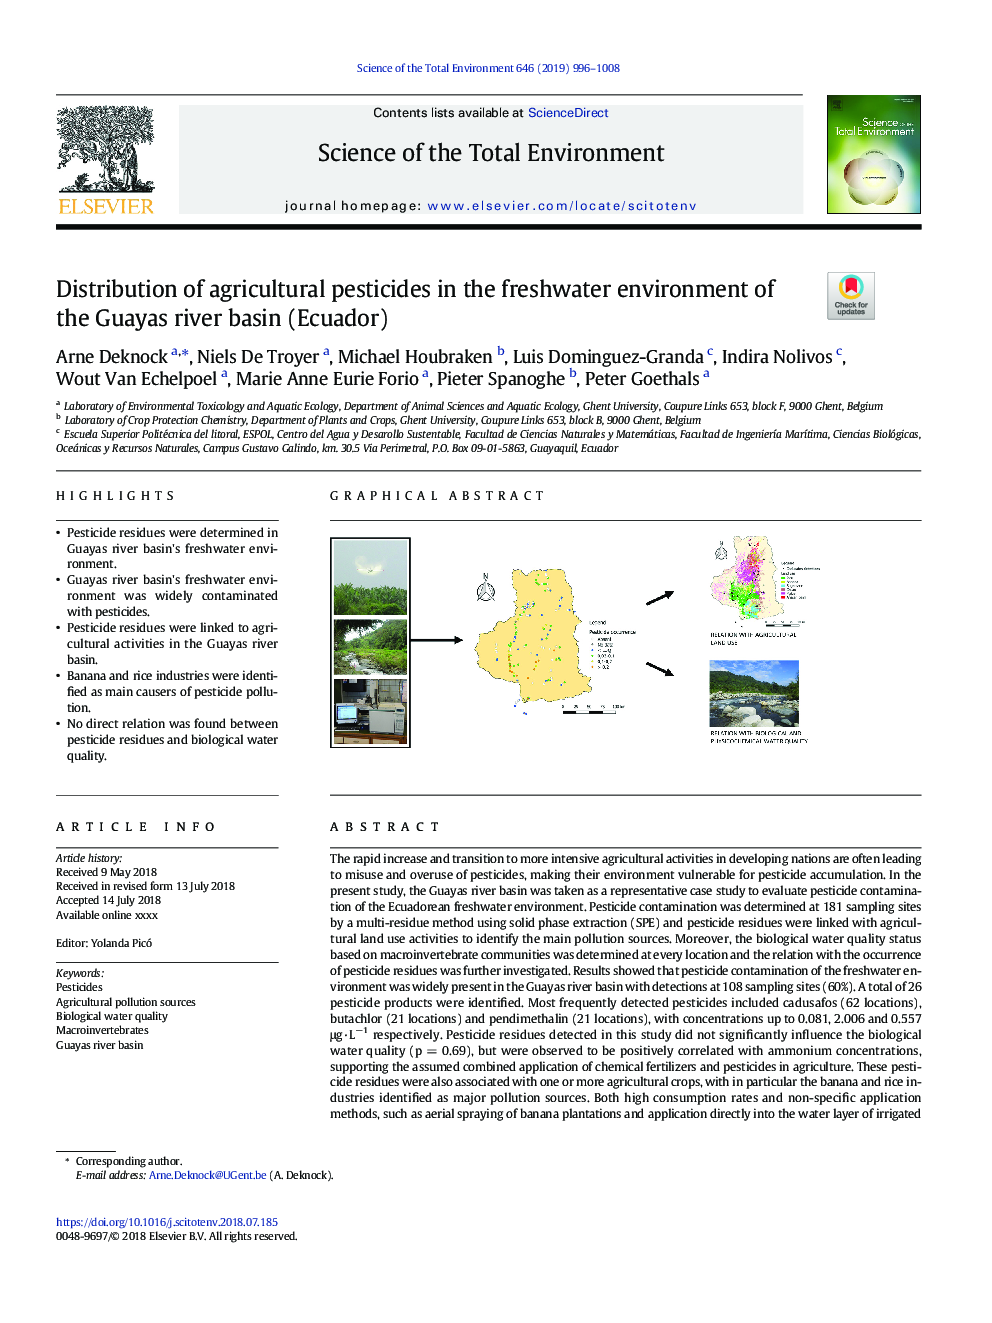 Distribution of agricultural pesticides in the freshwater environment of the Guayas river basin (Ecuador)